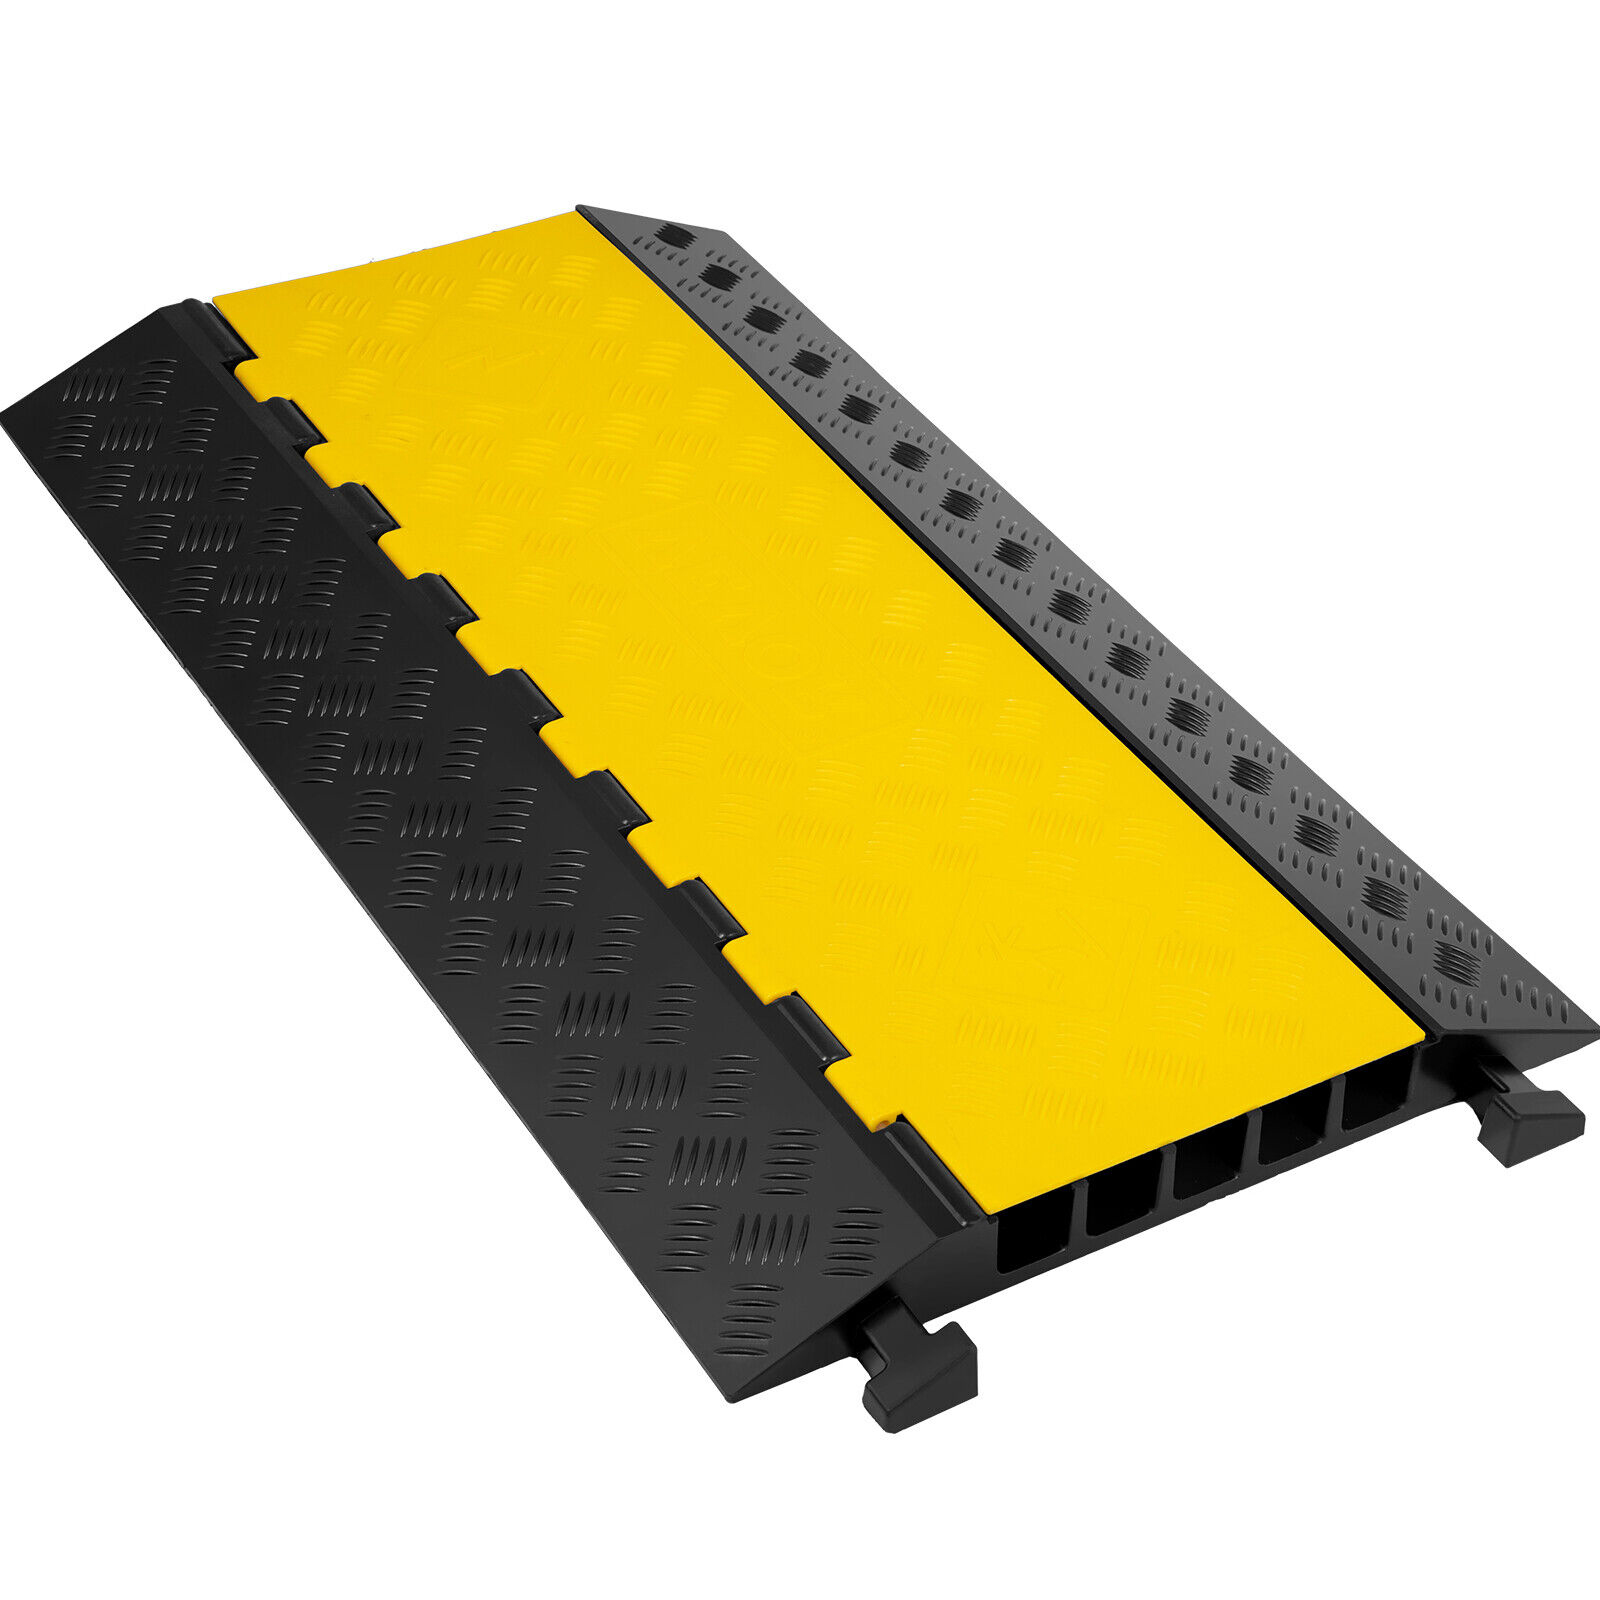 VEVOR 5 Channel Rubber Electrical Wire Cable Protector Ramp. Cover Guard Warehouse